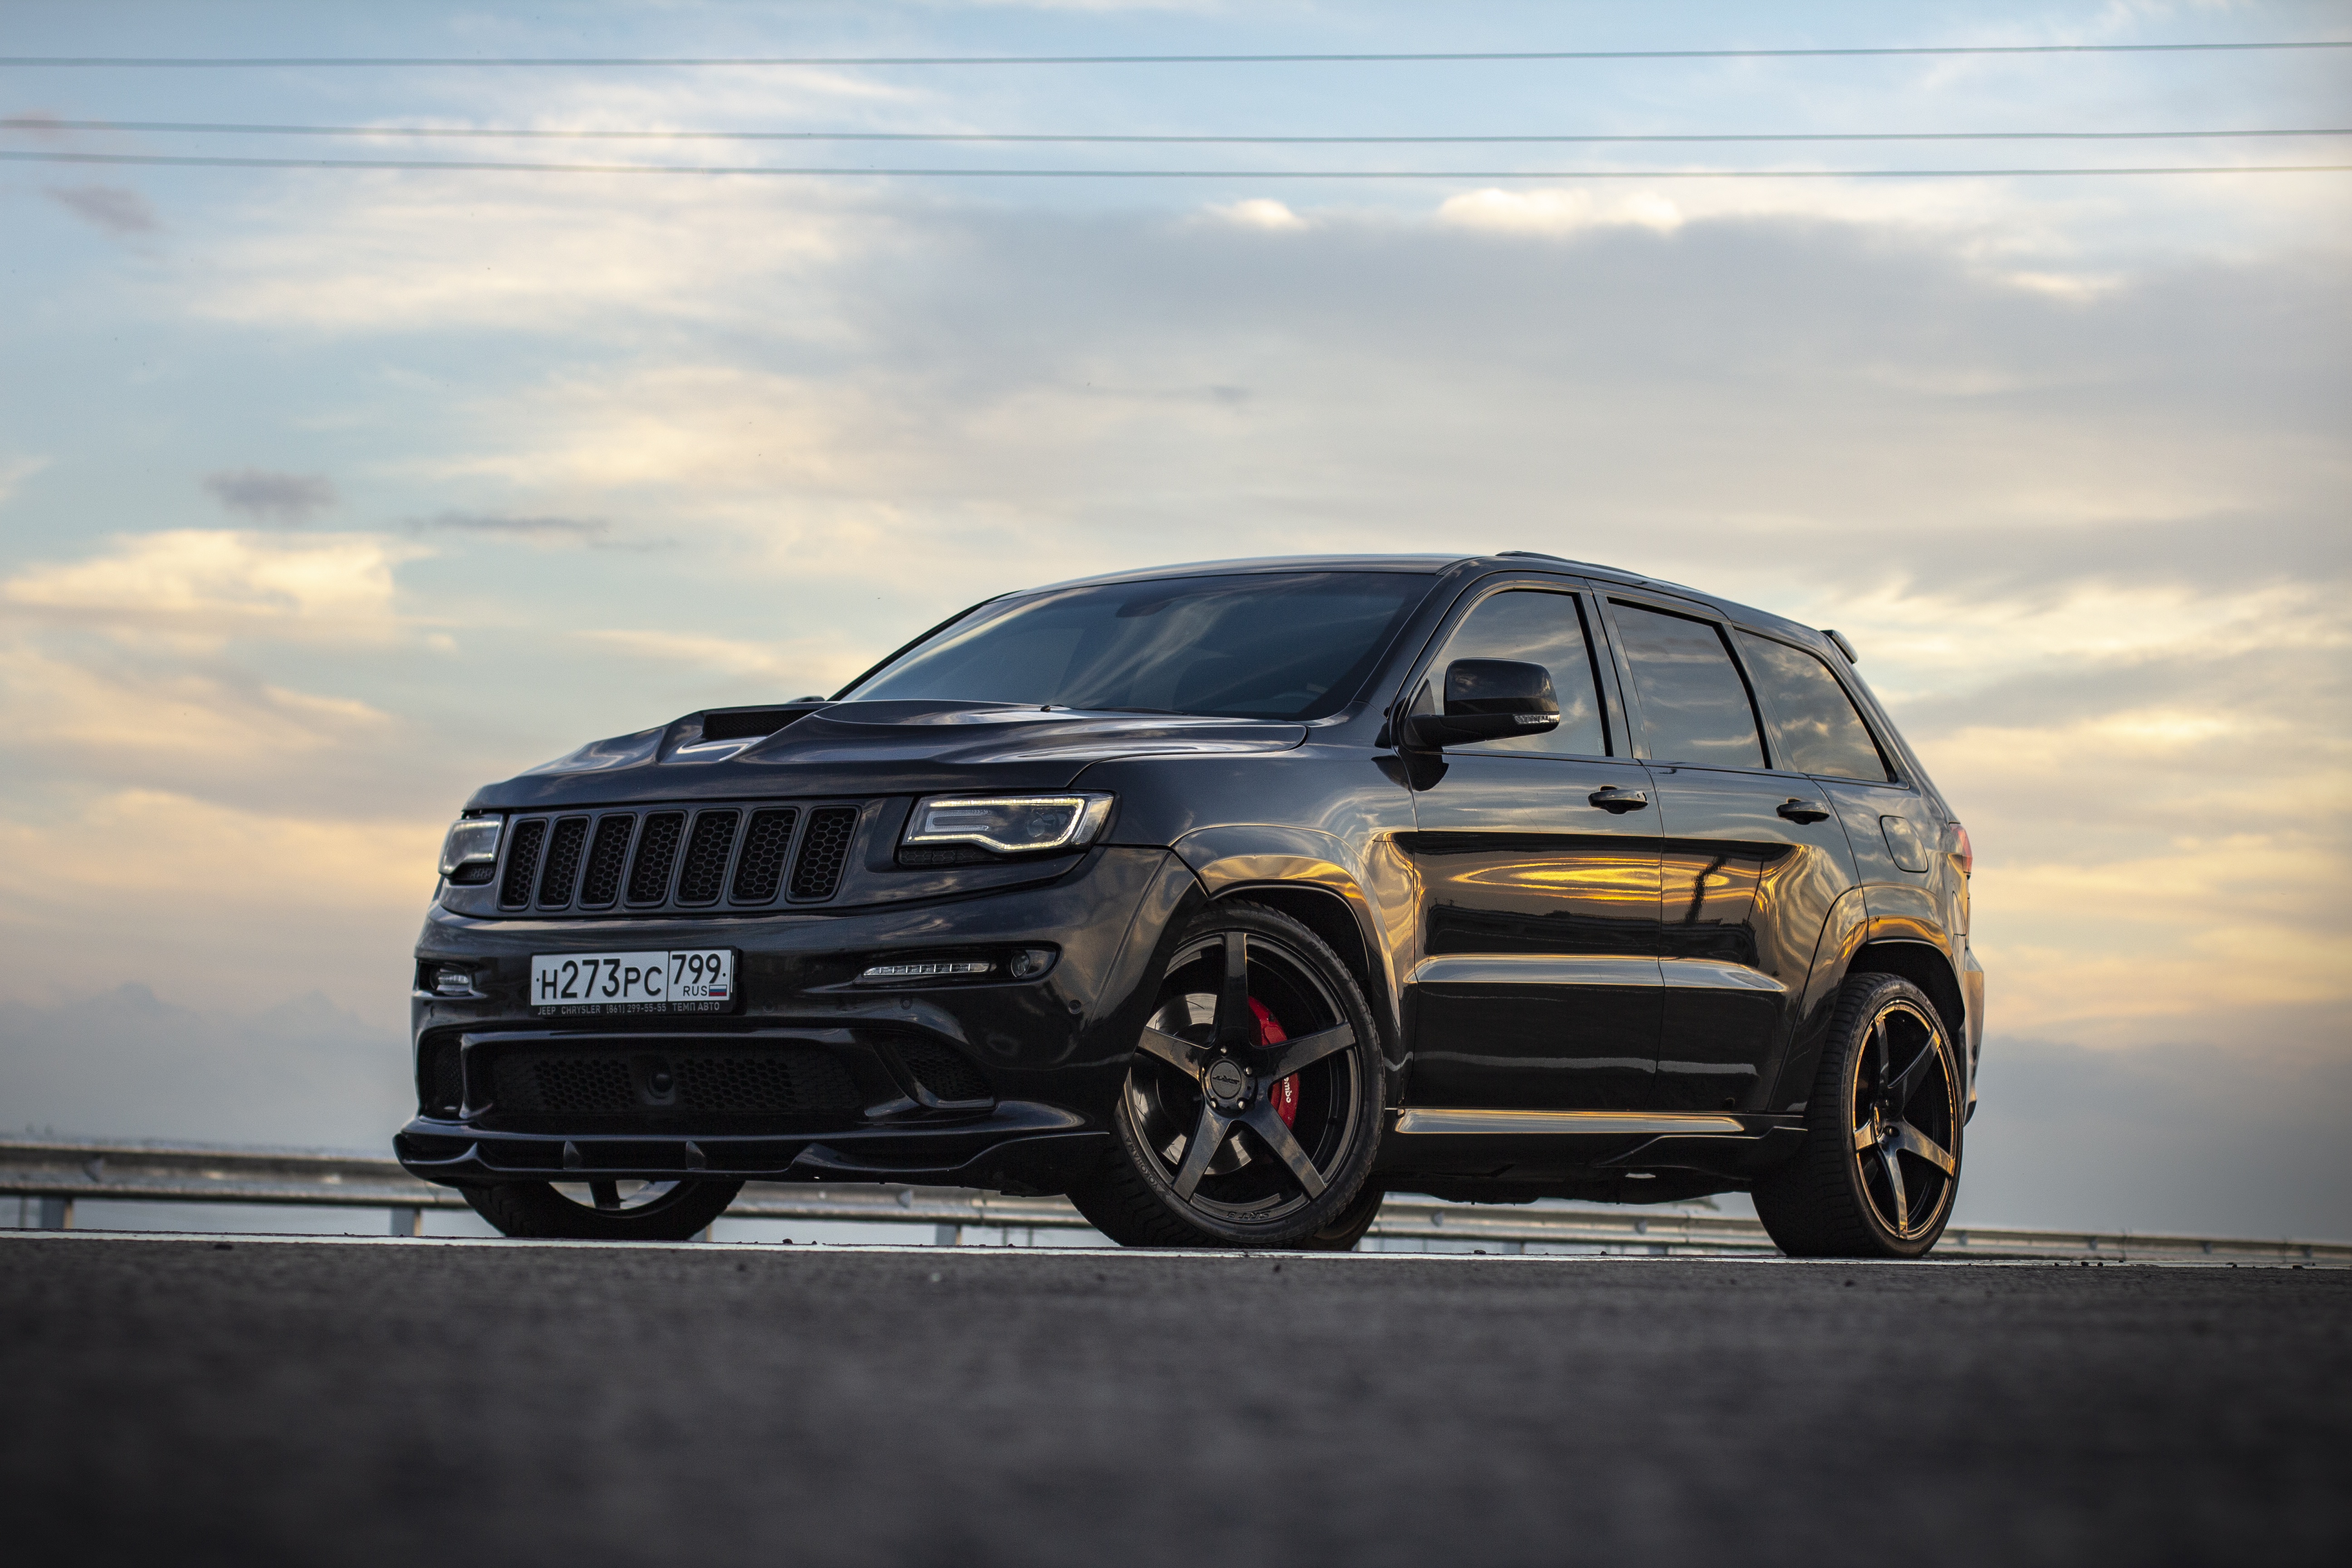 jeep grand cherokee, vehicles, jeep grand cherokee srt8, black car, car, jeep, suv for android